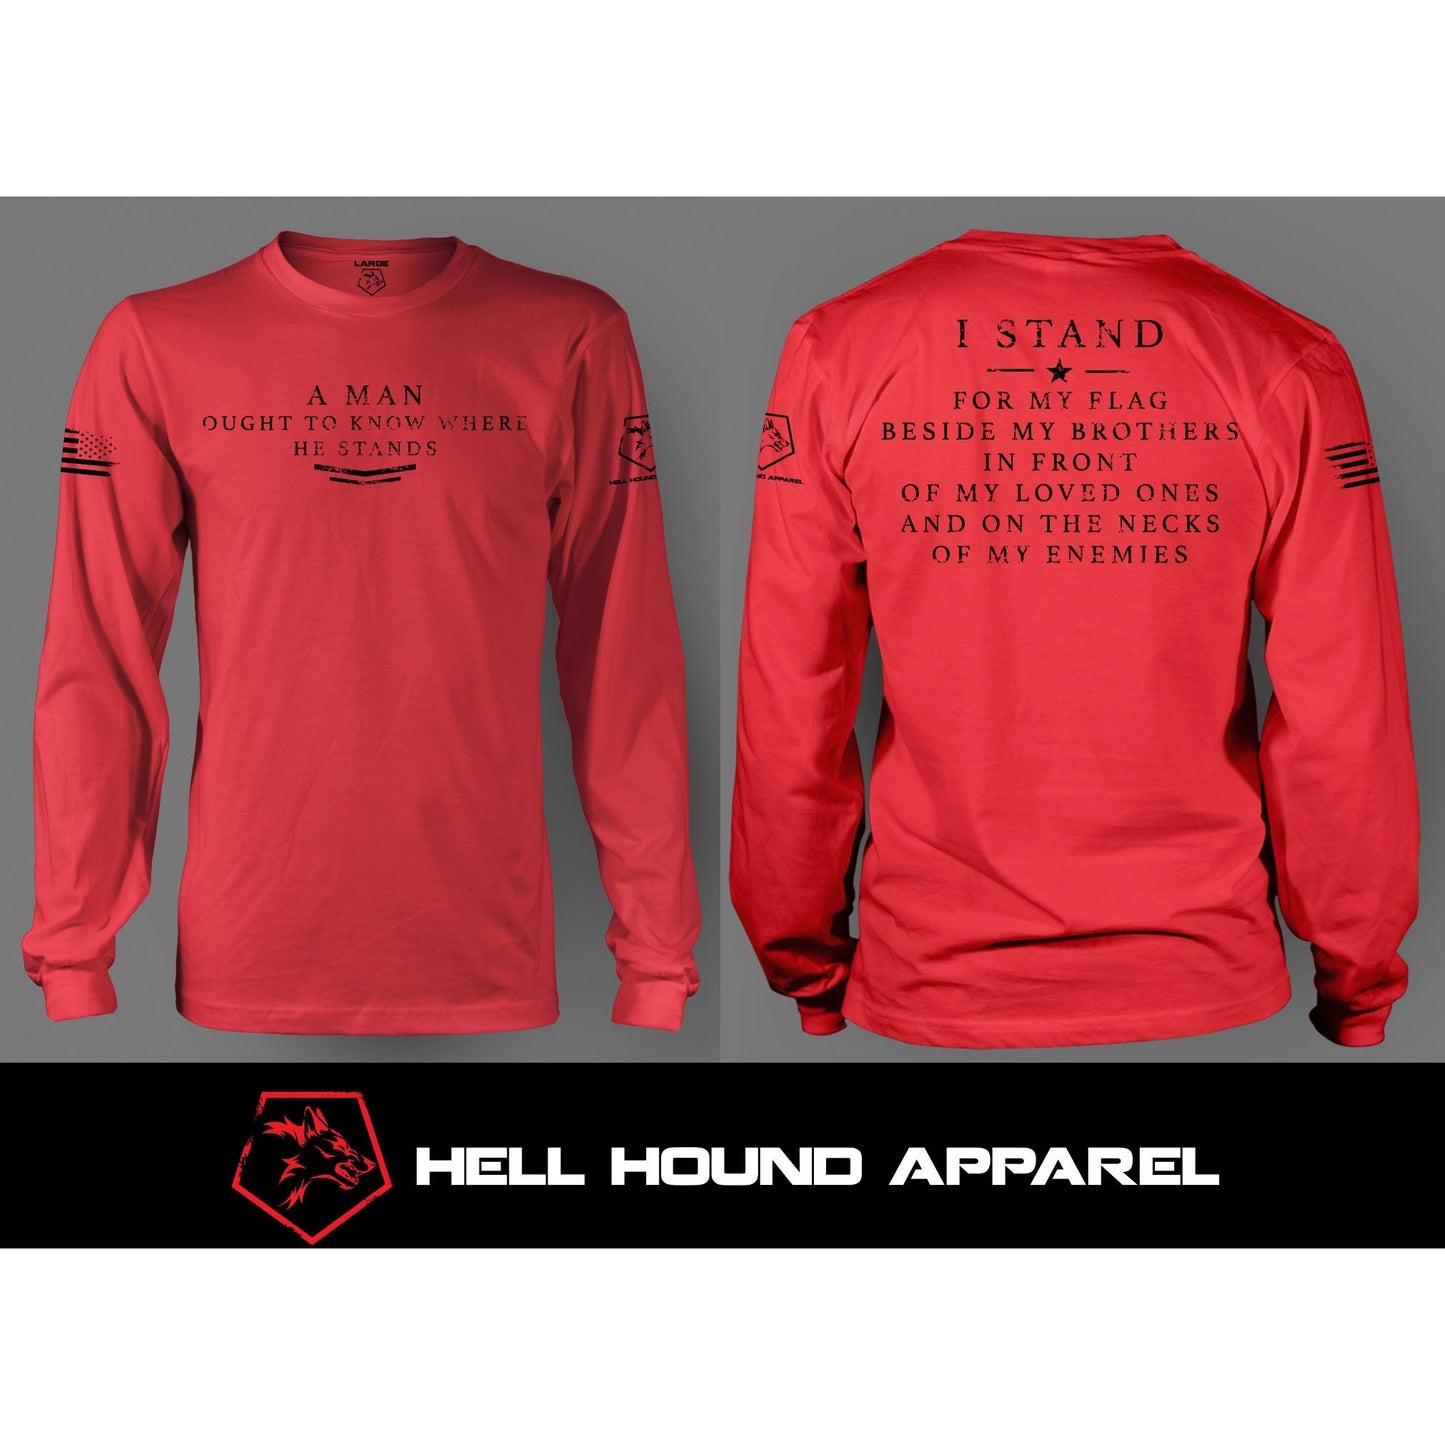 I STAND LONG SLEEVE RED